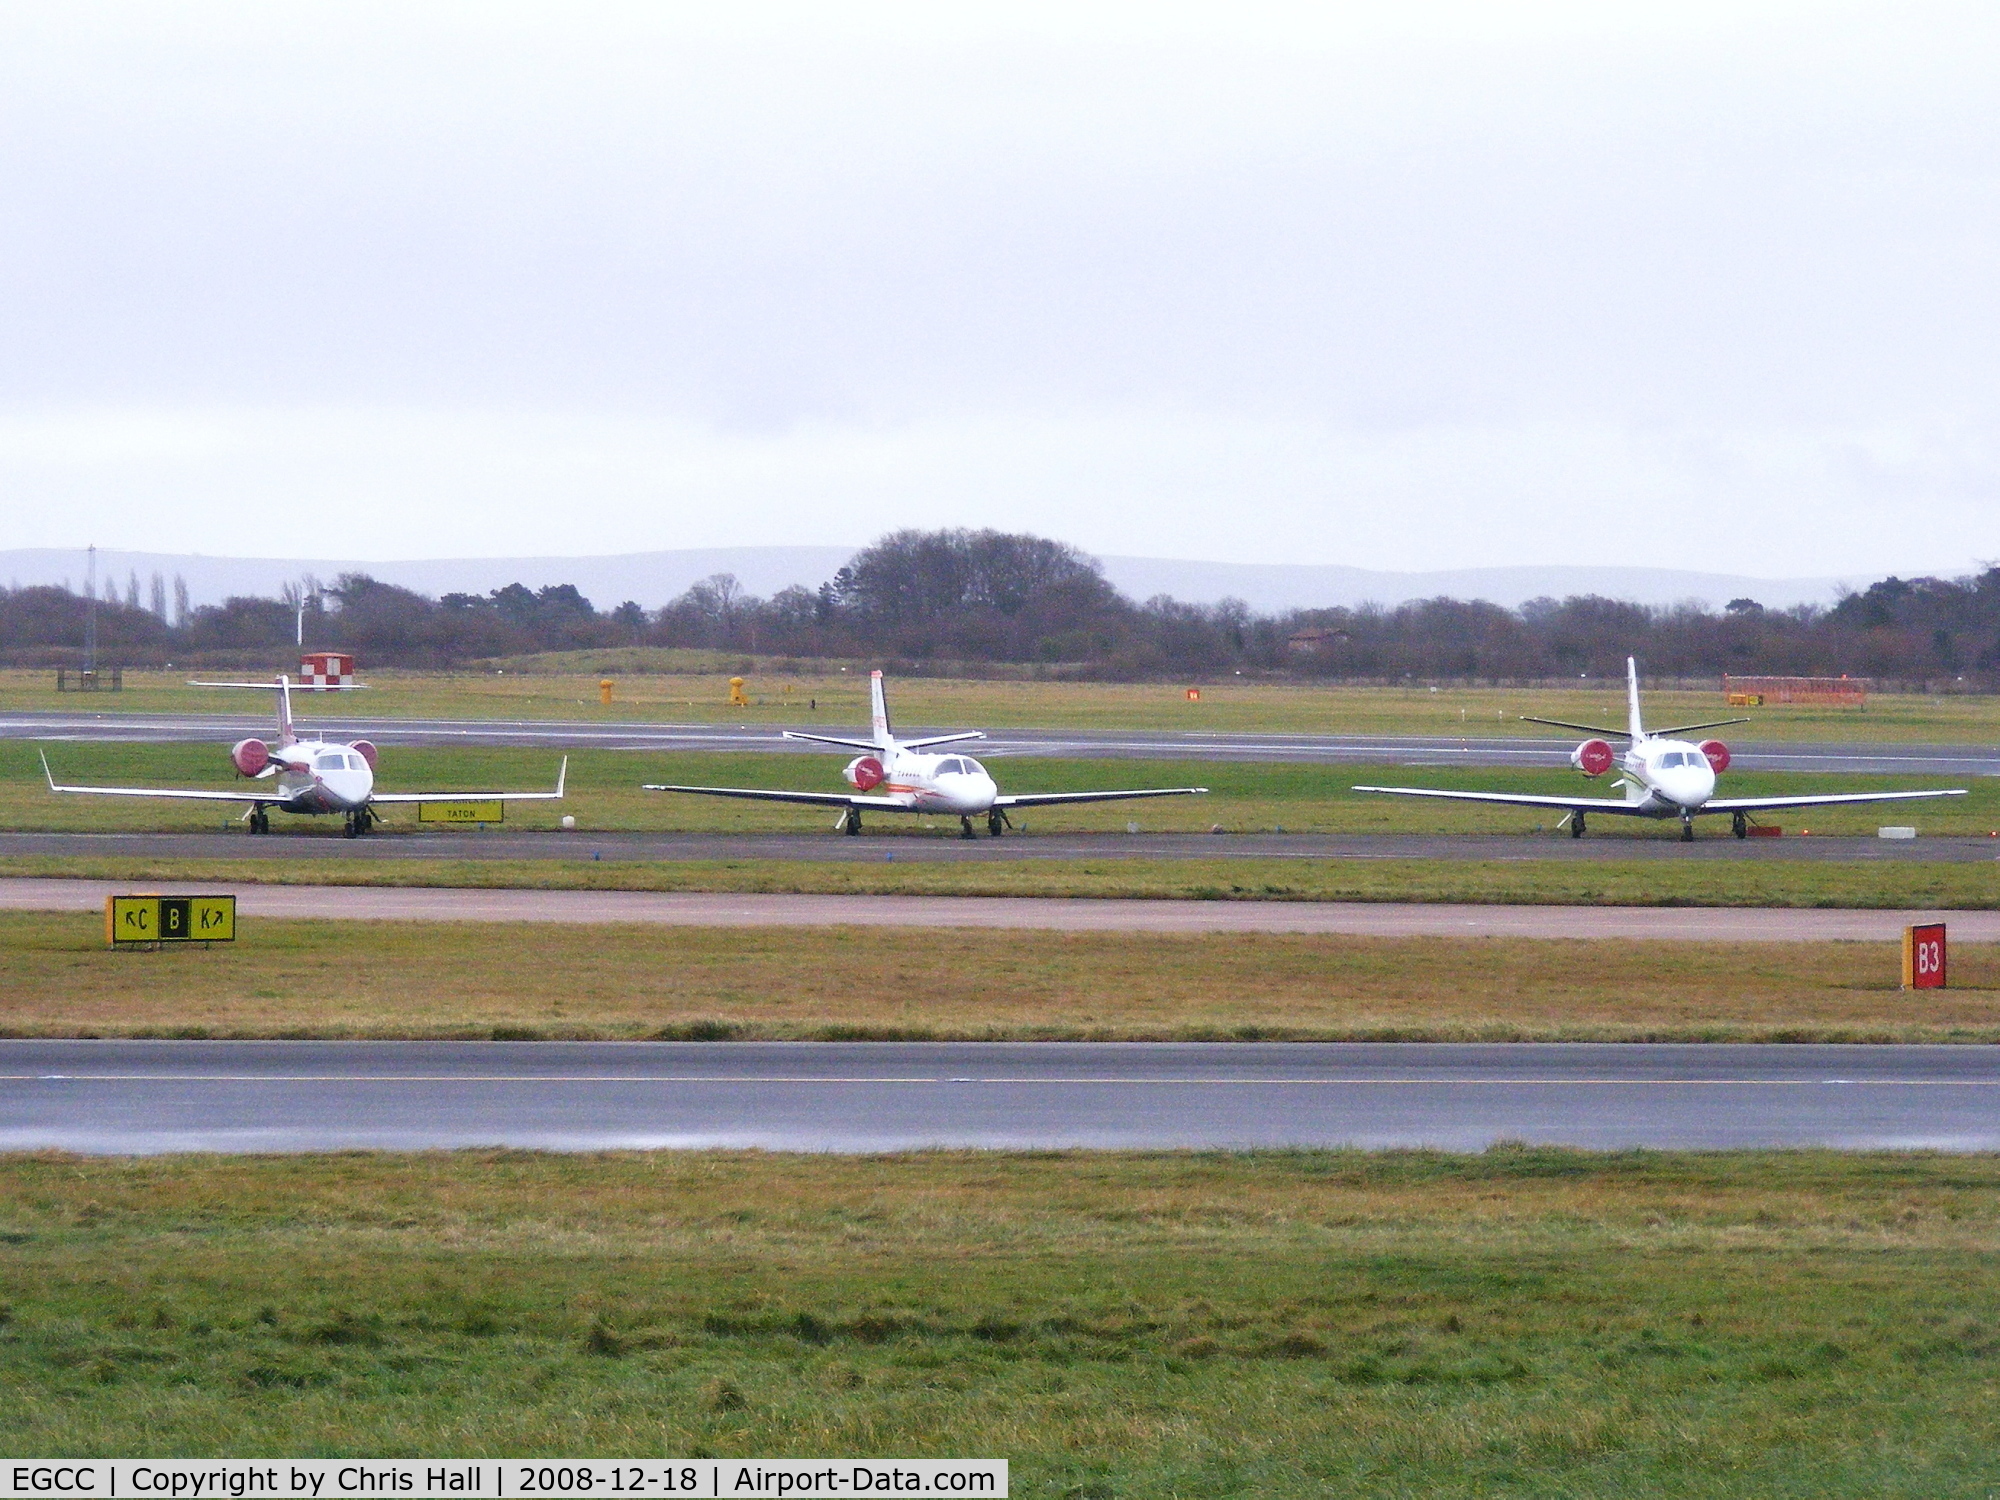 Manchester Airport, Manchester, England United Kingdom (EGCC) - from left to right G-RWGW; VP-CED; N560TH